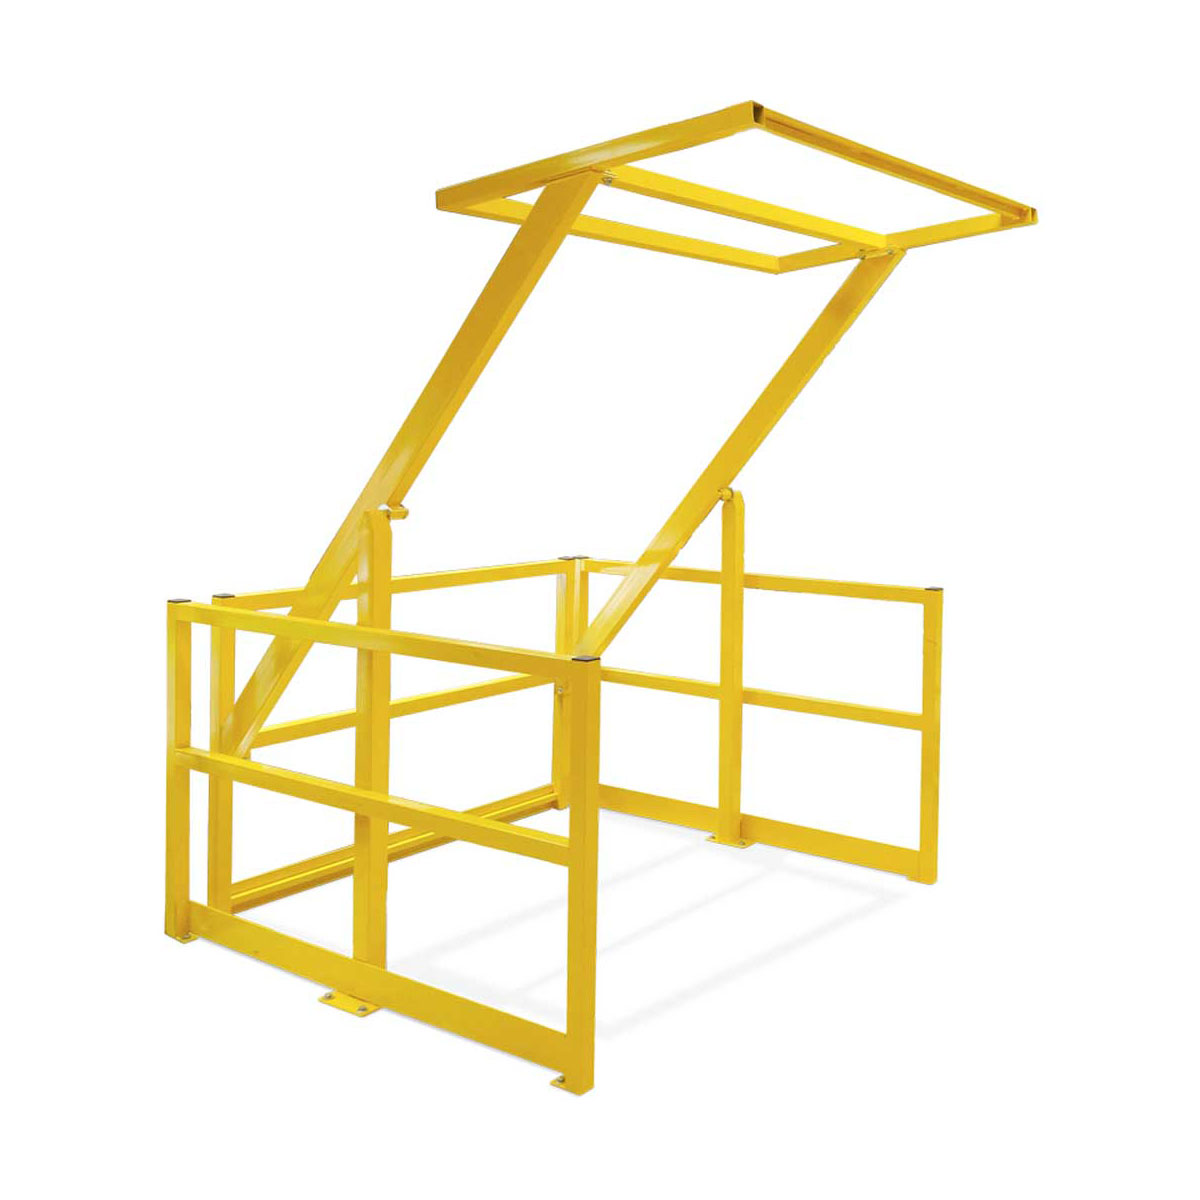 Buy Mezzanine Loading Gate available at Astrolift NZ